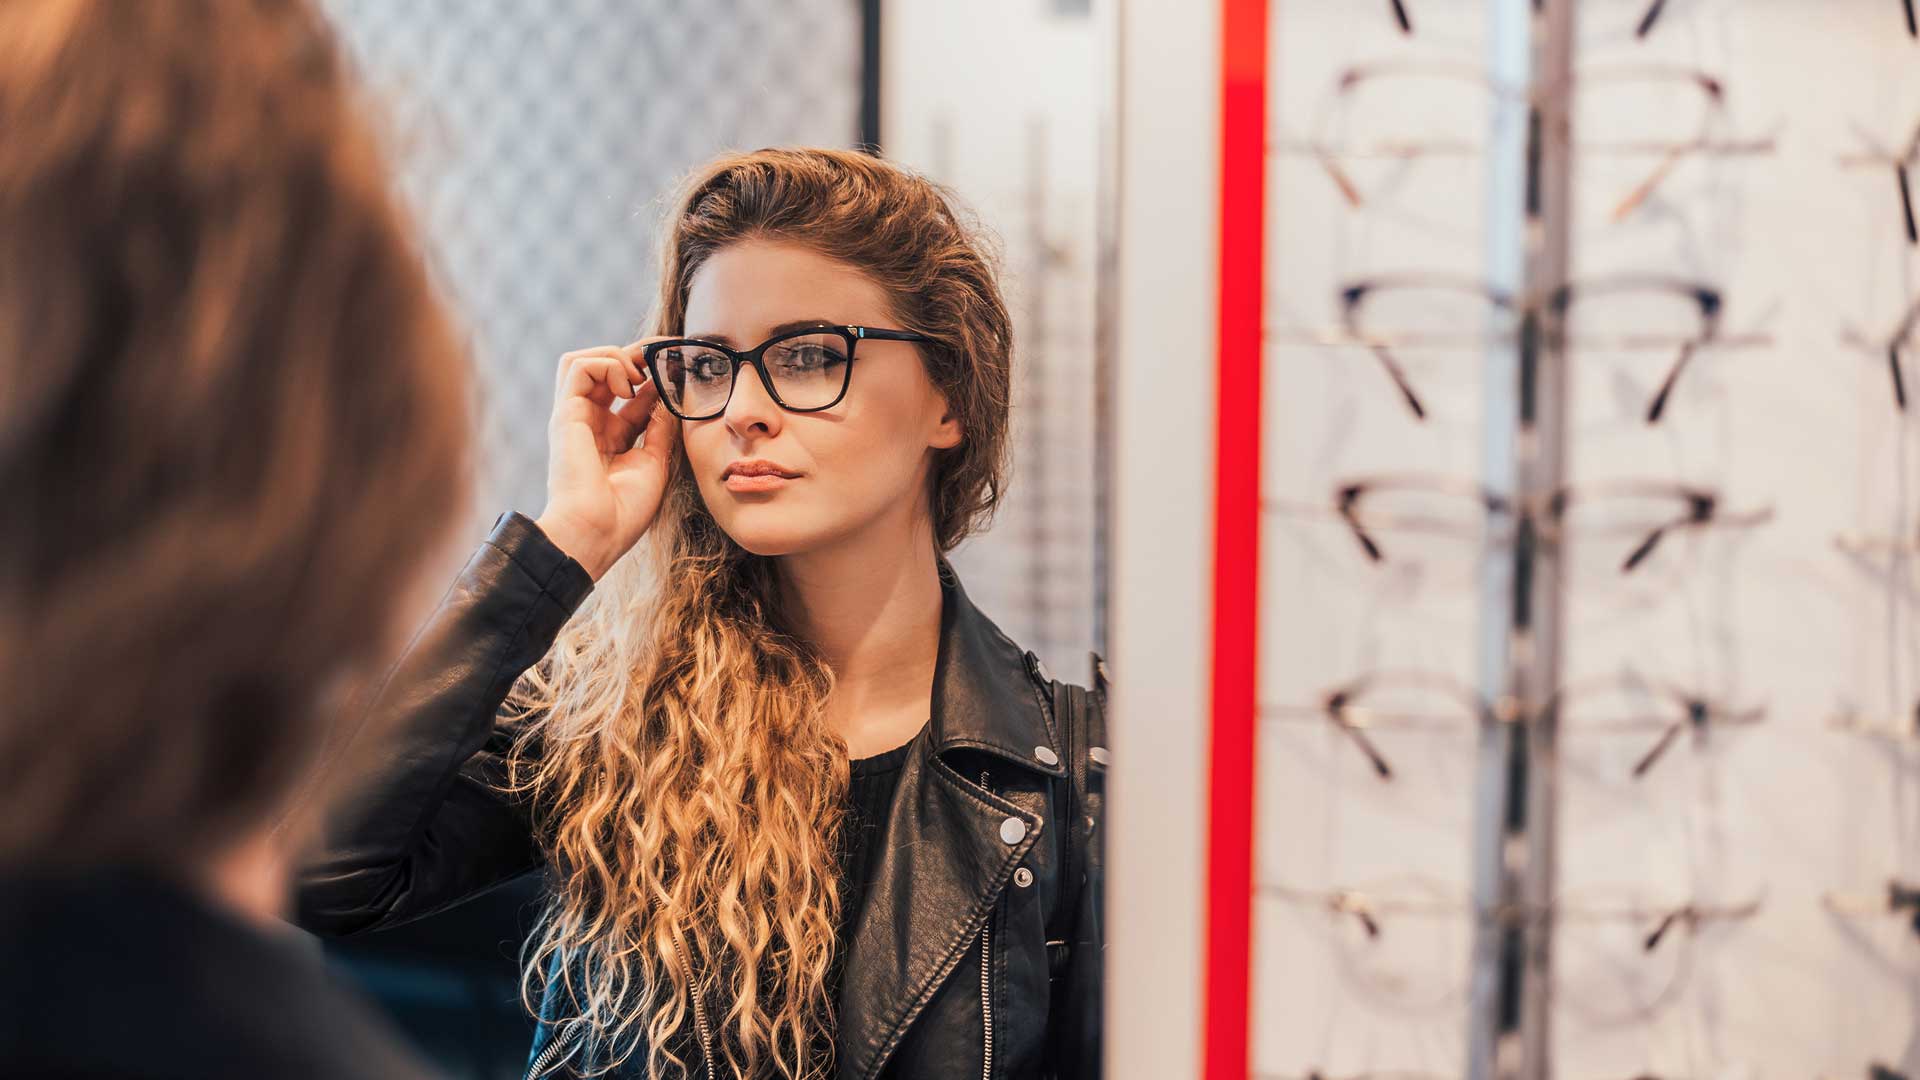 Whether you need your first pair of eyeglasses or consider frames your favorite accessory, shop for glasses from an independent eyewear boutique for these benefits.